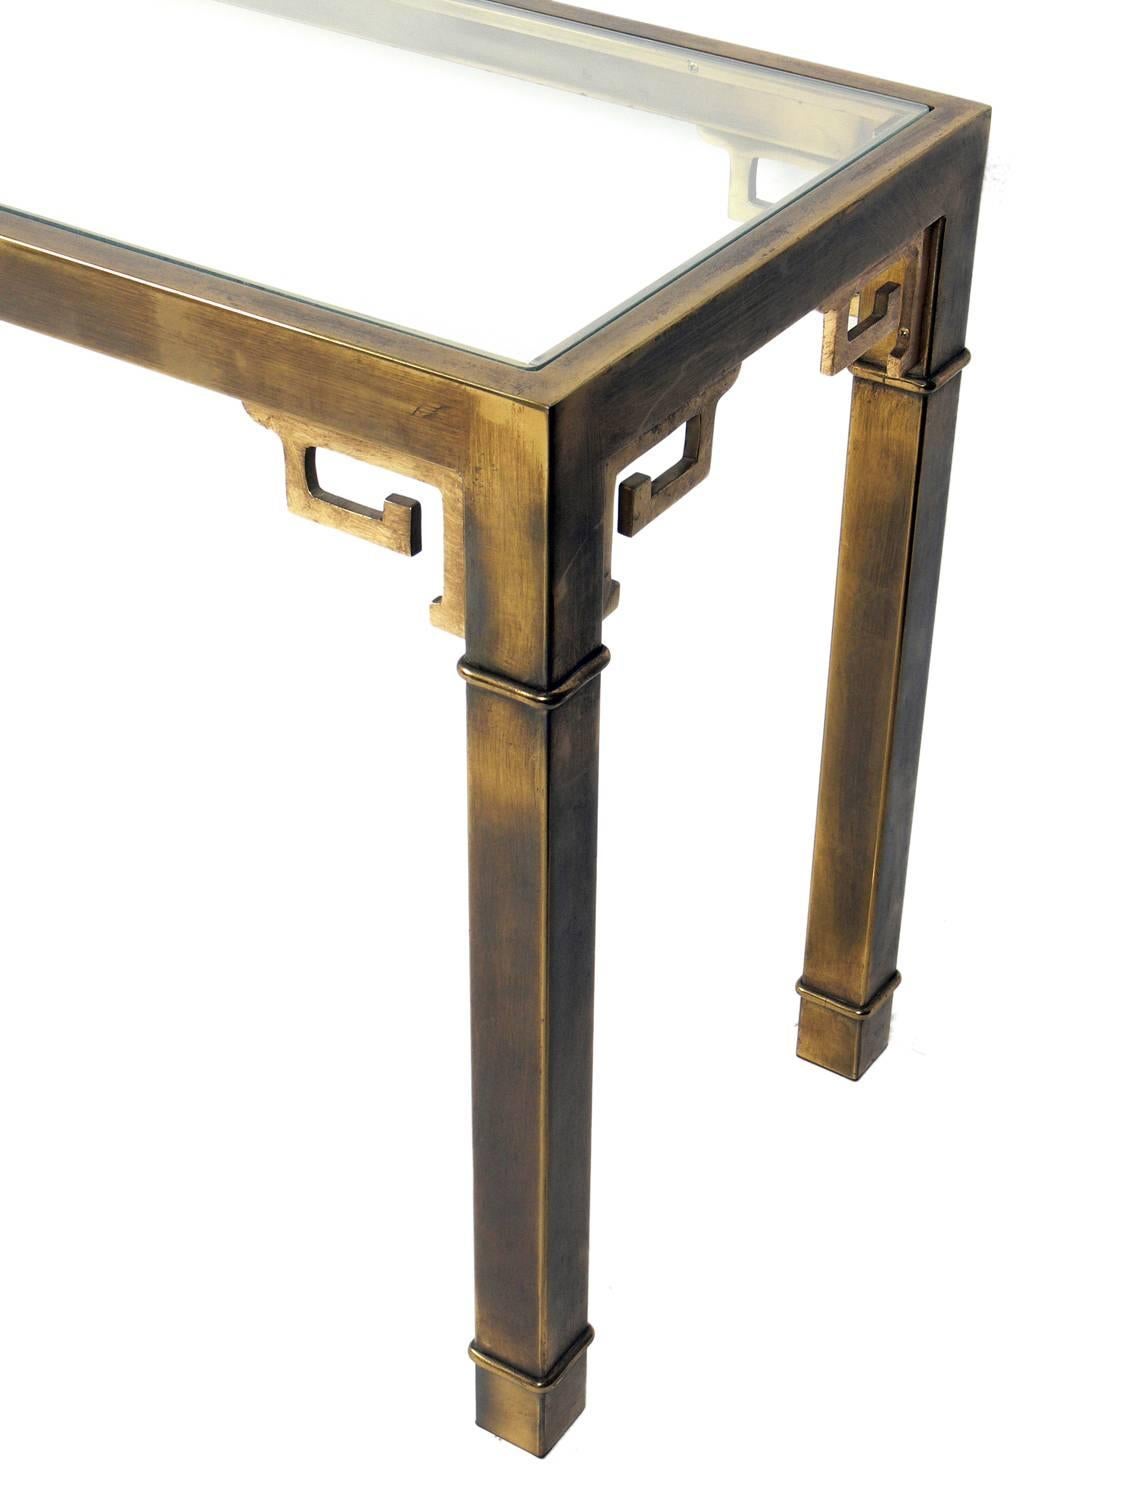 American Asian Influenced Brass Console Table by Mastercraft